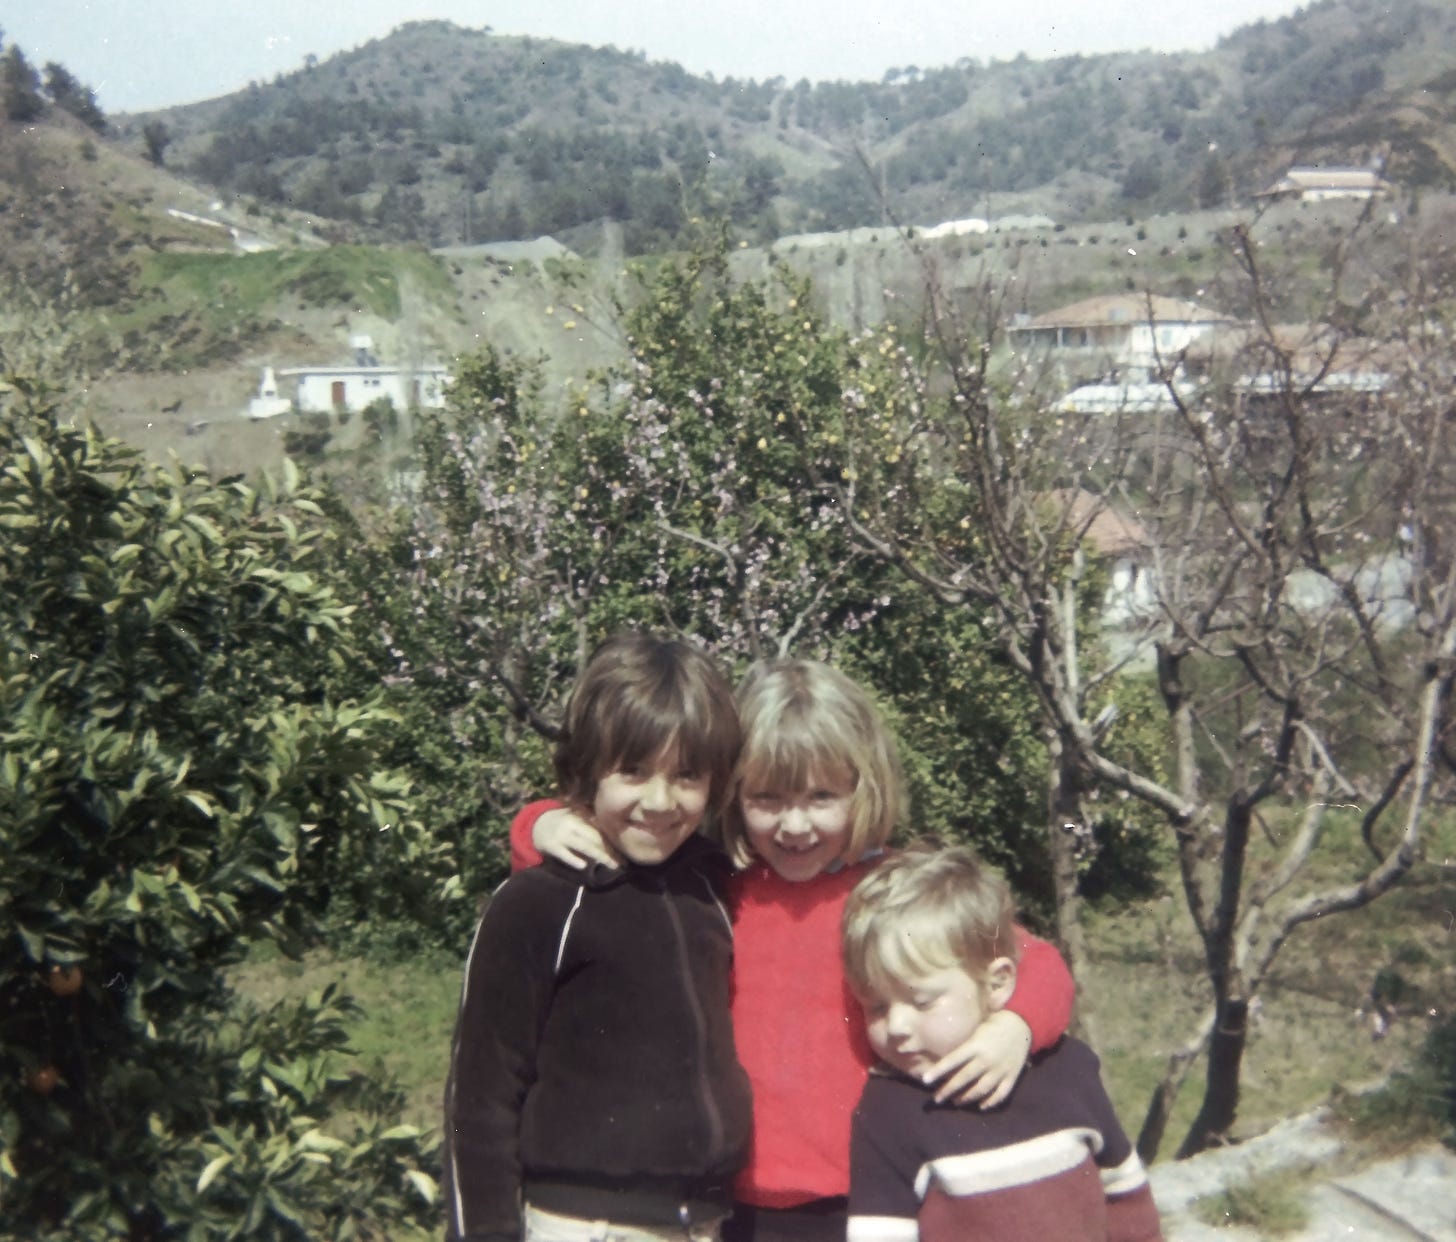 Three little half and half English-Cypriots somewhere in the Troodos mountains, imprinting a landscape without knowing it